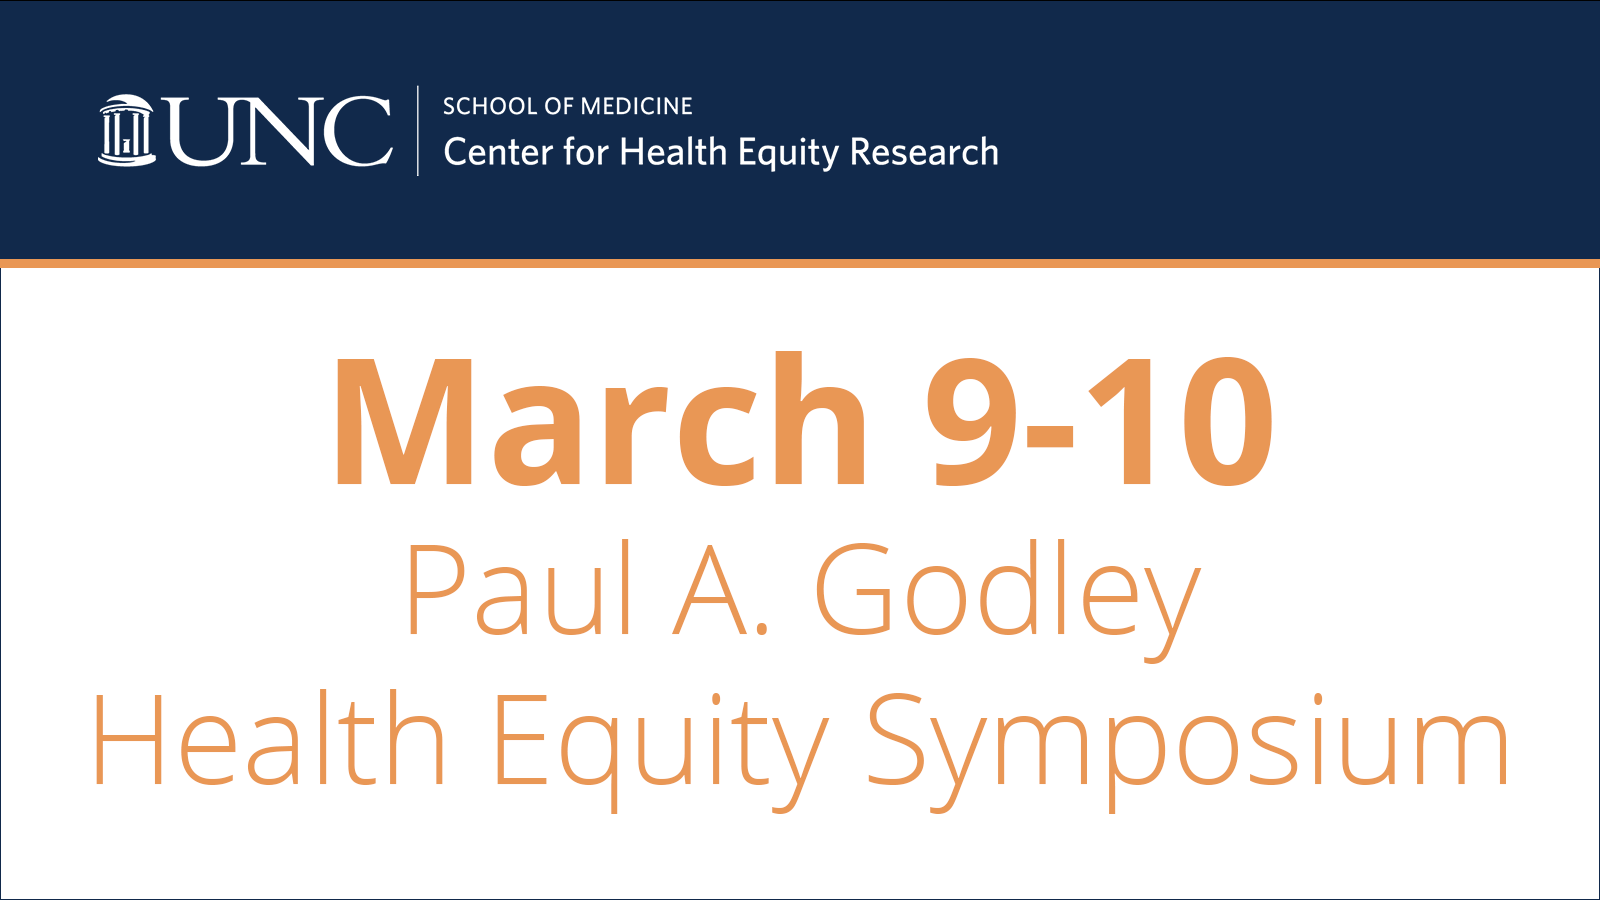 Save the Date card for the March 9-10, 2022 Paul A. Godley Health Equity Symposium